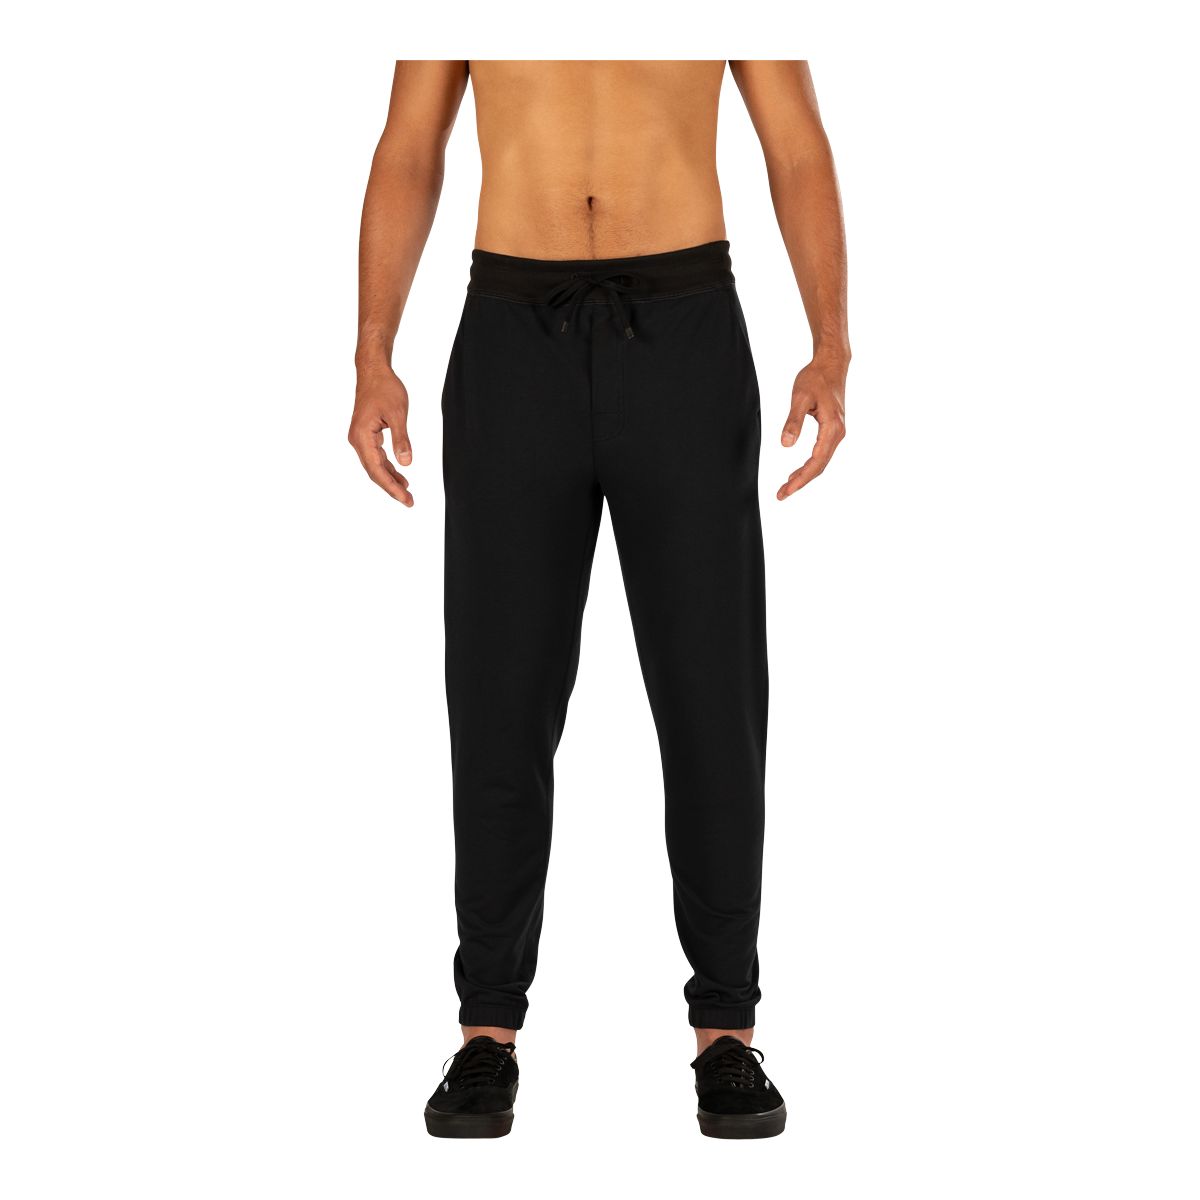 Saxx Men's Down Time Mid Weight Knit Moisture Wicking Lounge Pants with Drawstring - Black